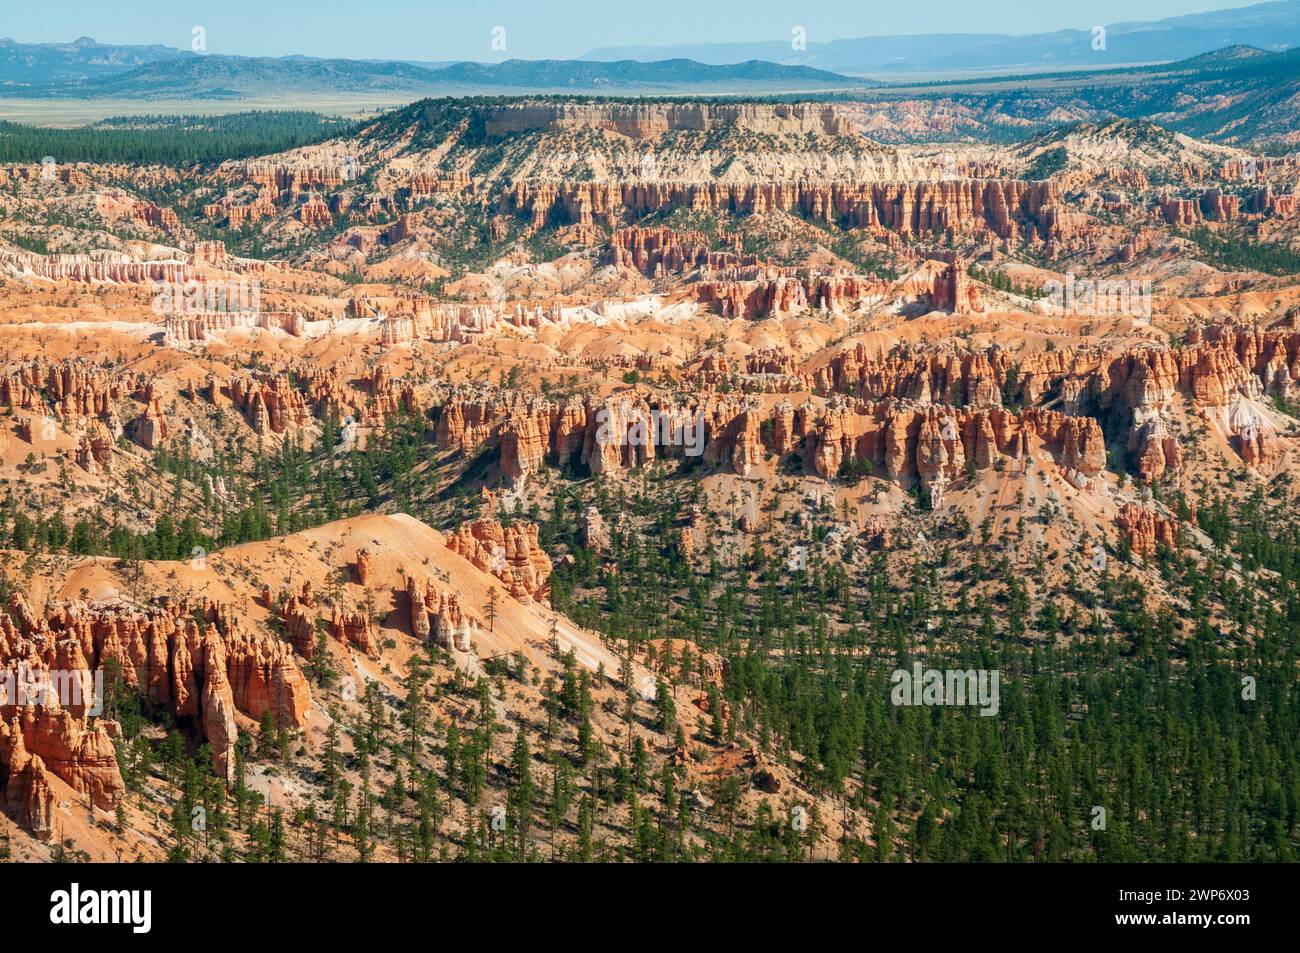 The Bryce Amphitheater at Bryce Canyon National Park in southern Utah, USA Stock Photo